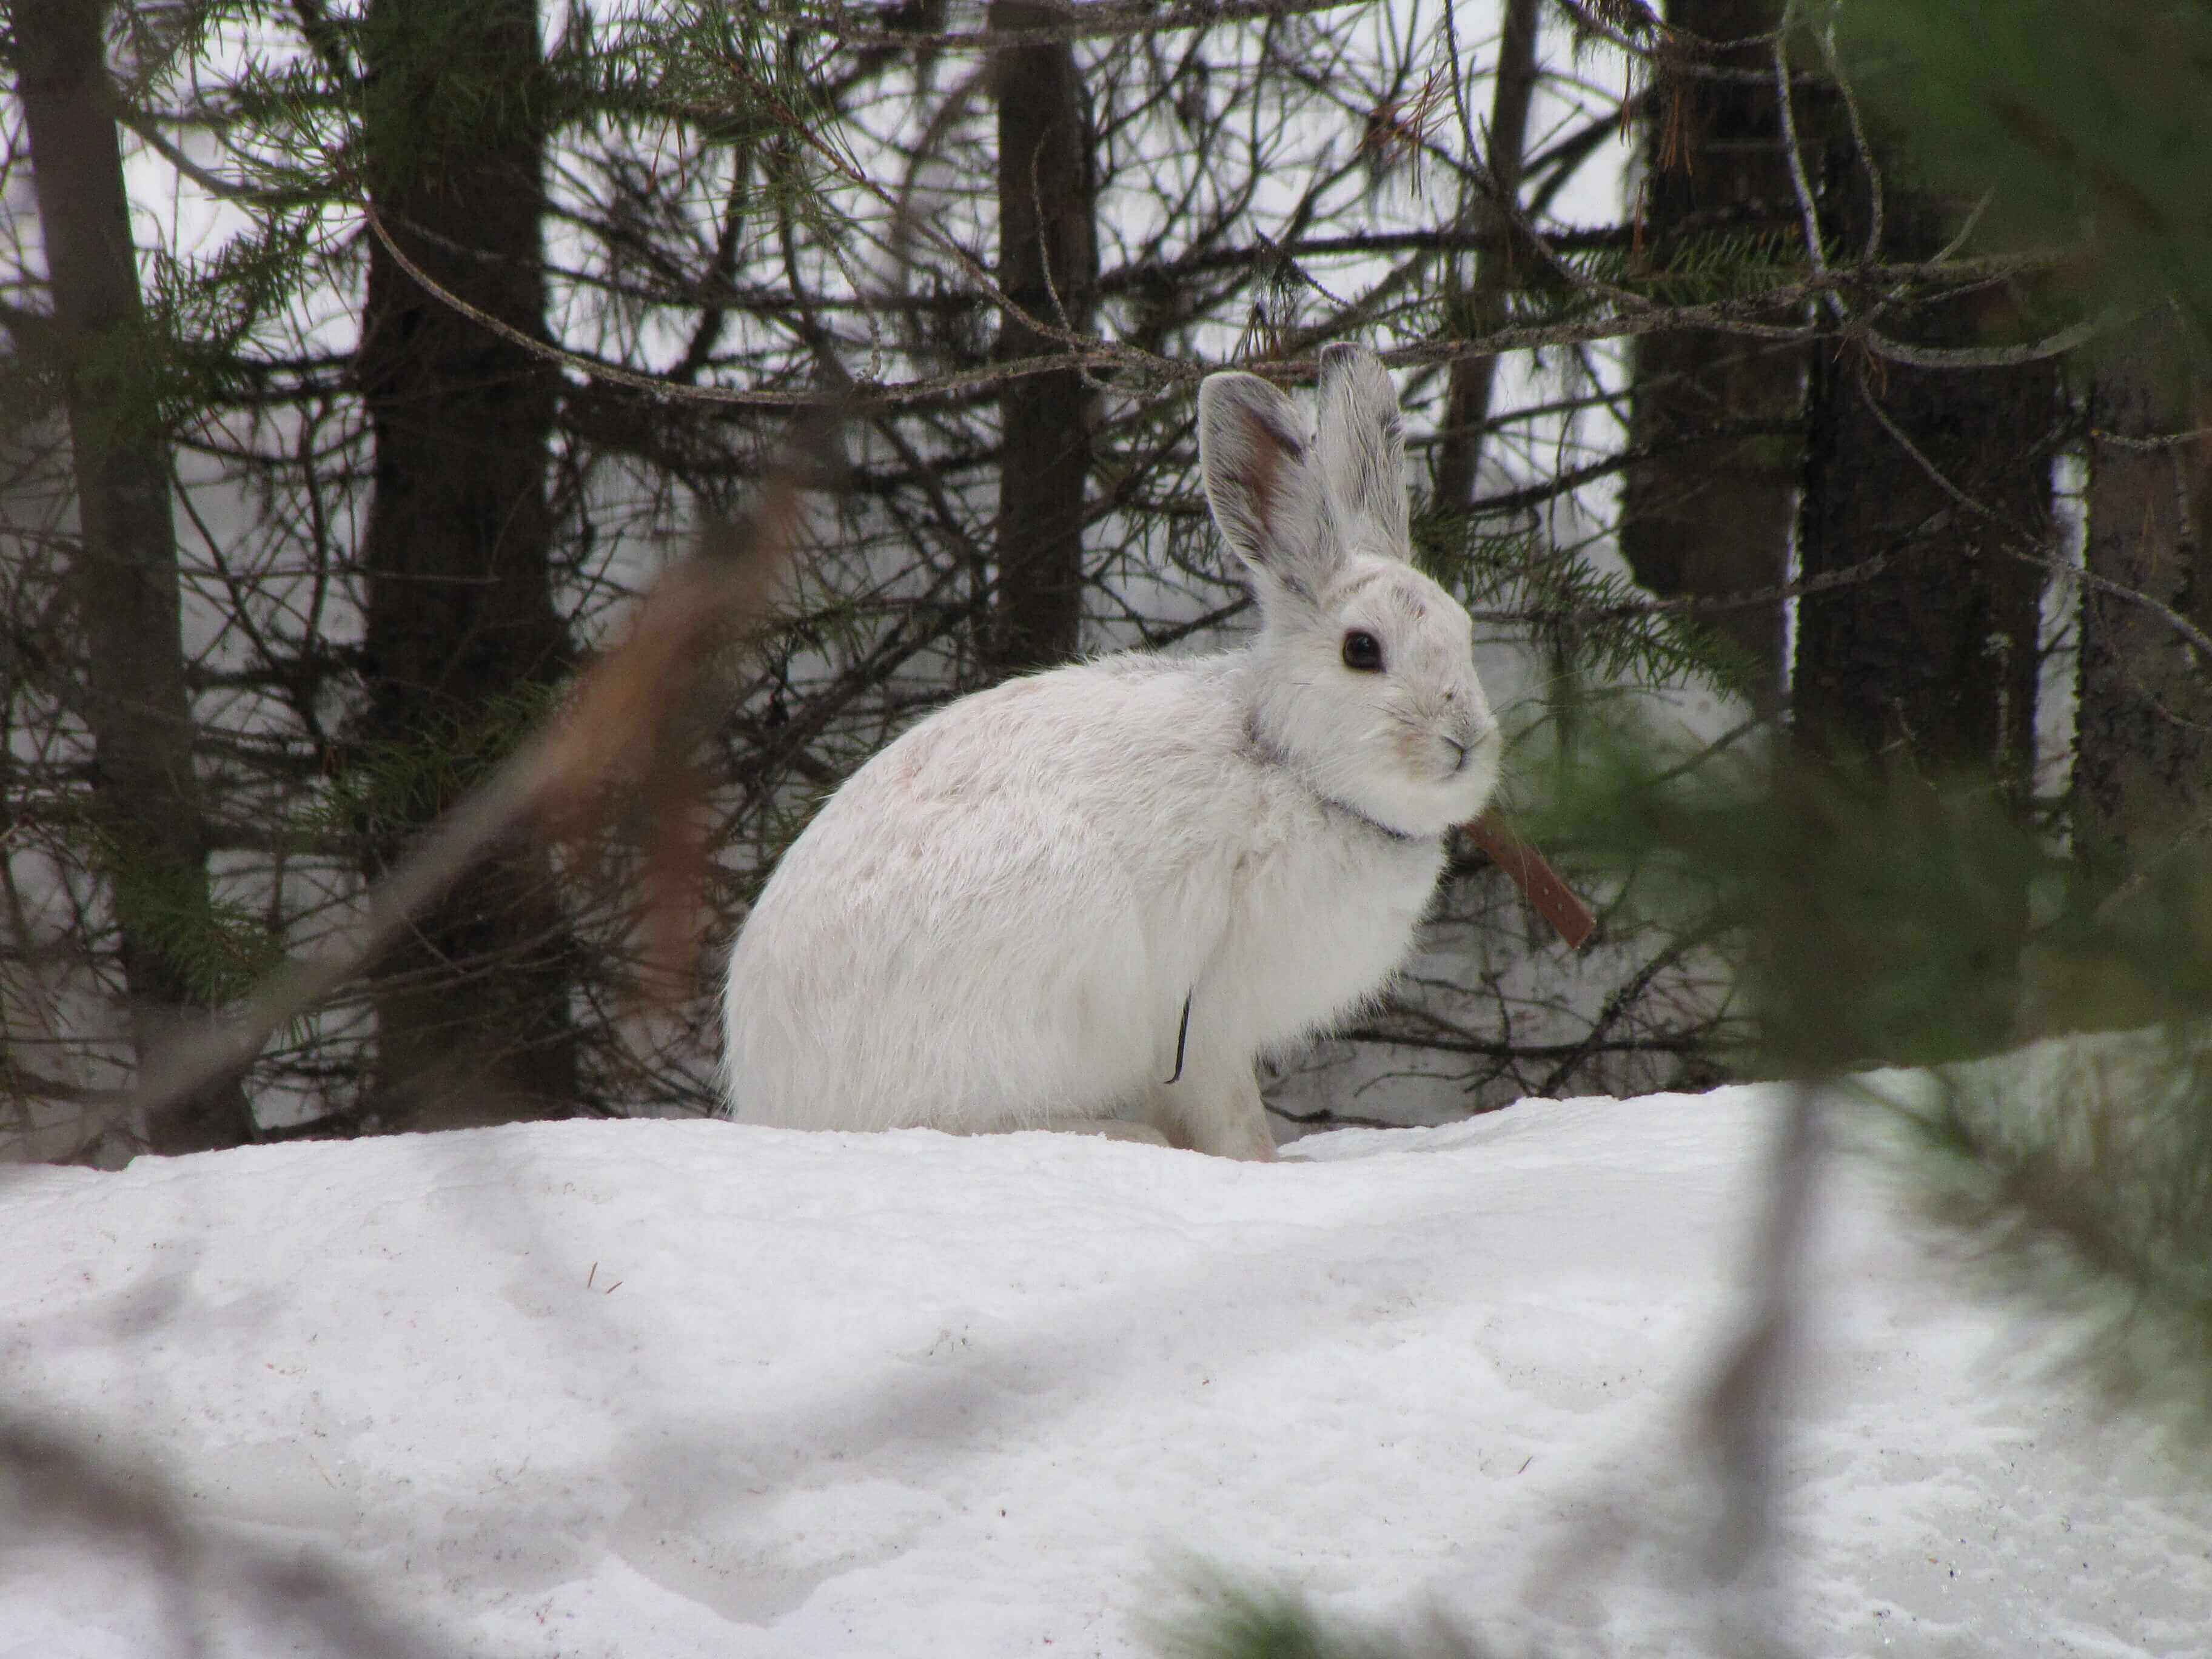 No snow, no hares: Climate change pushes emblematic species north